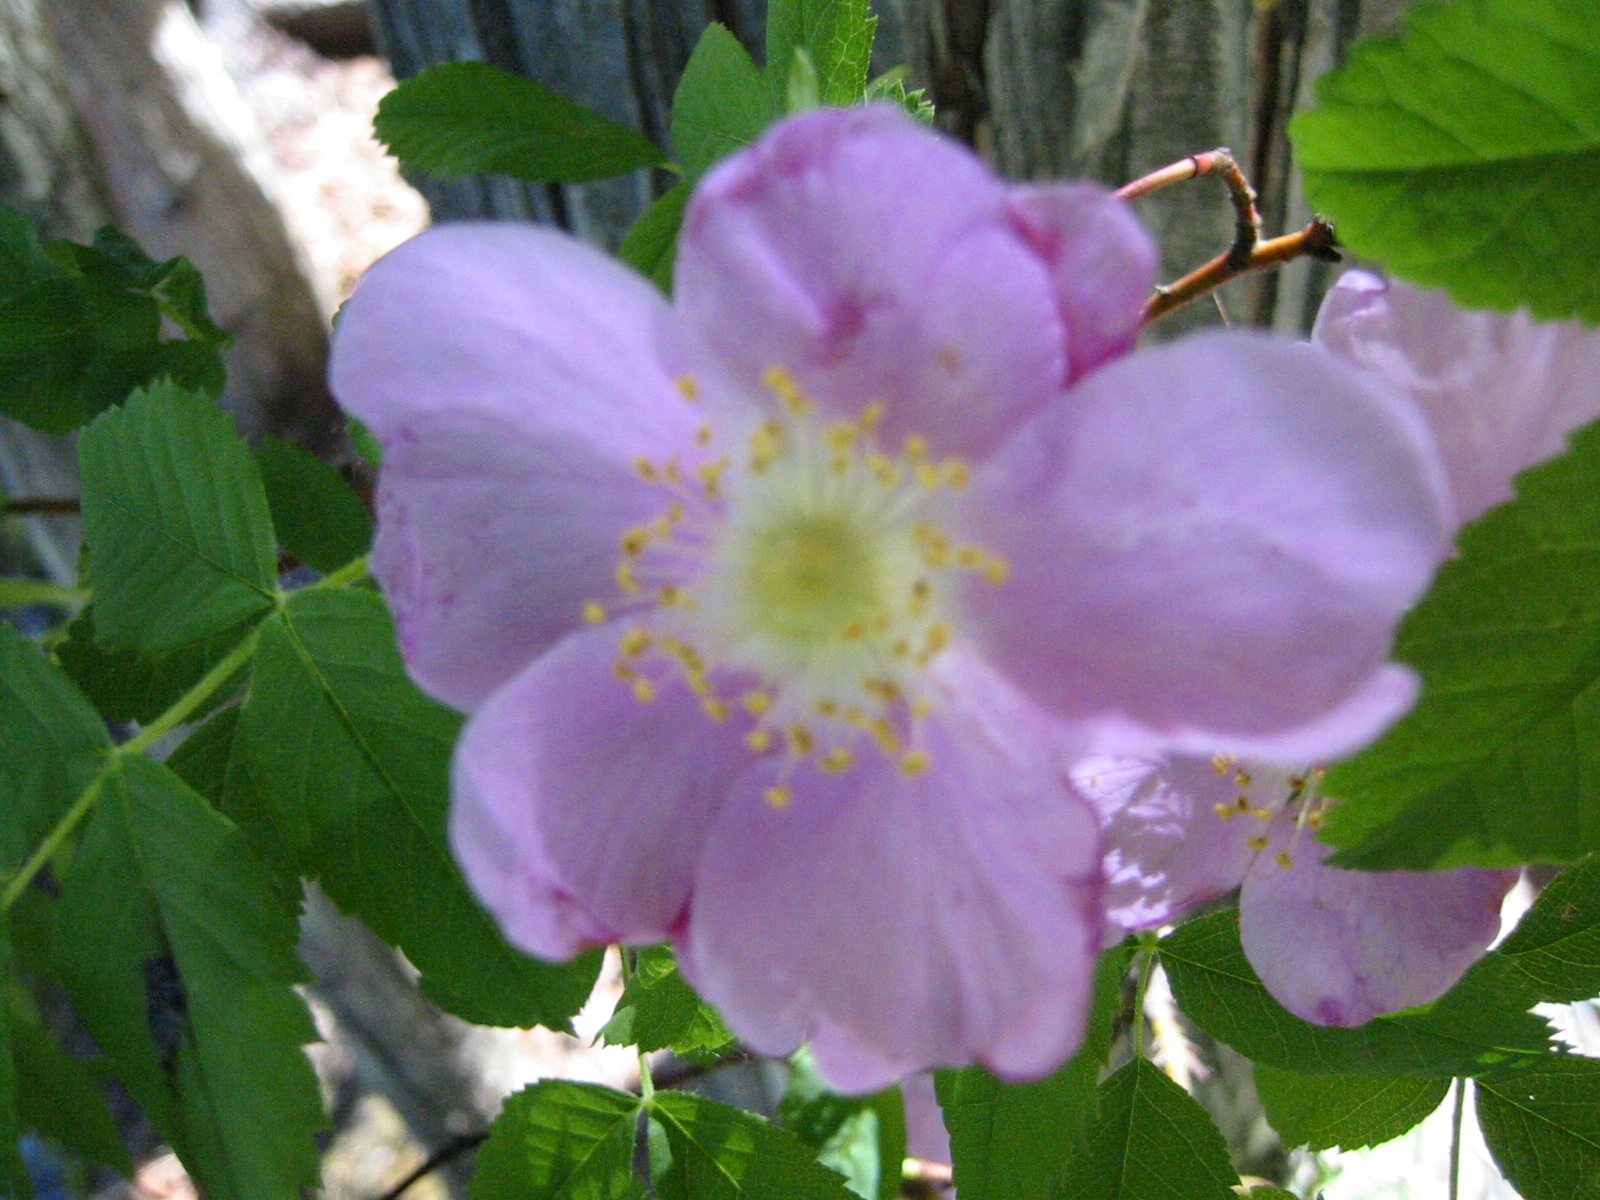 a pink flower with white center surrounded by green leaves